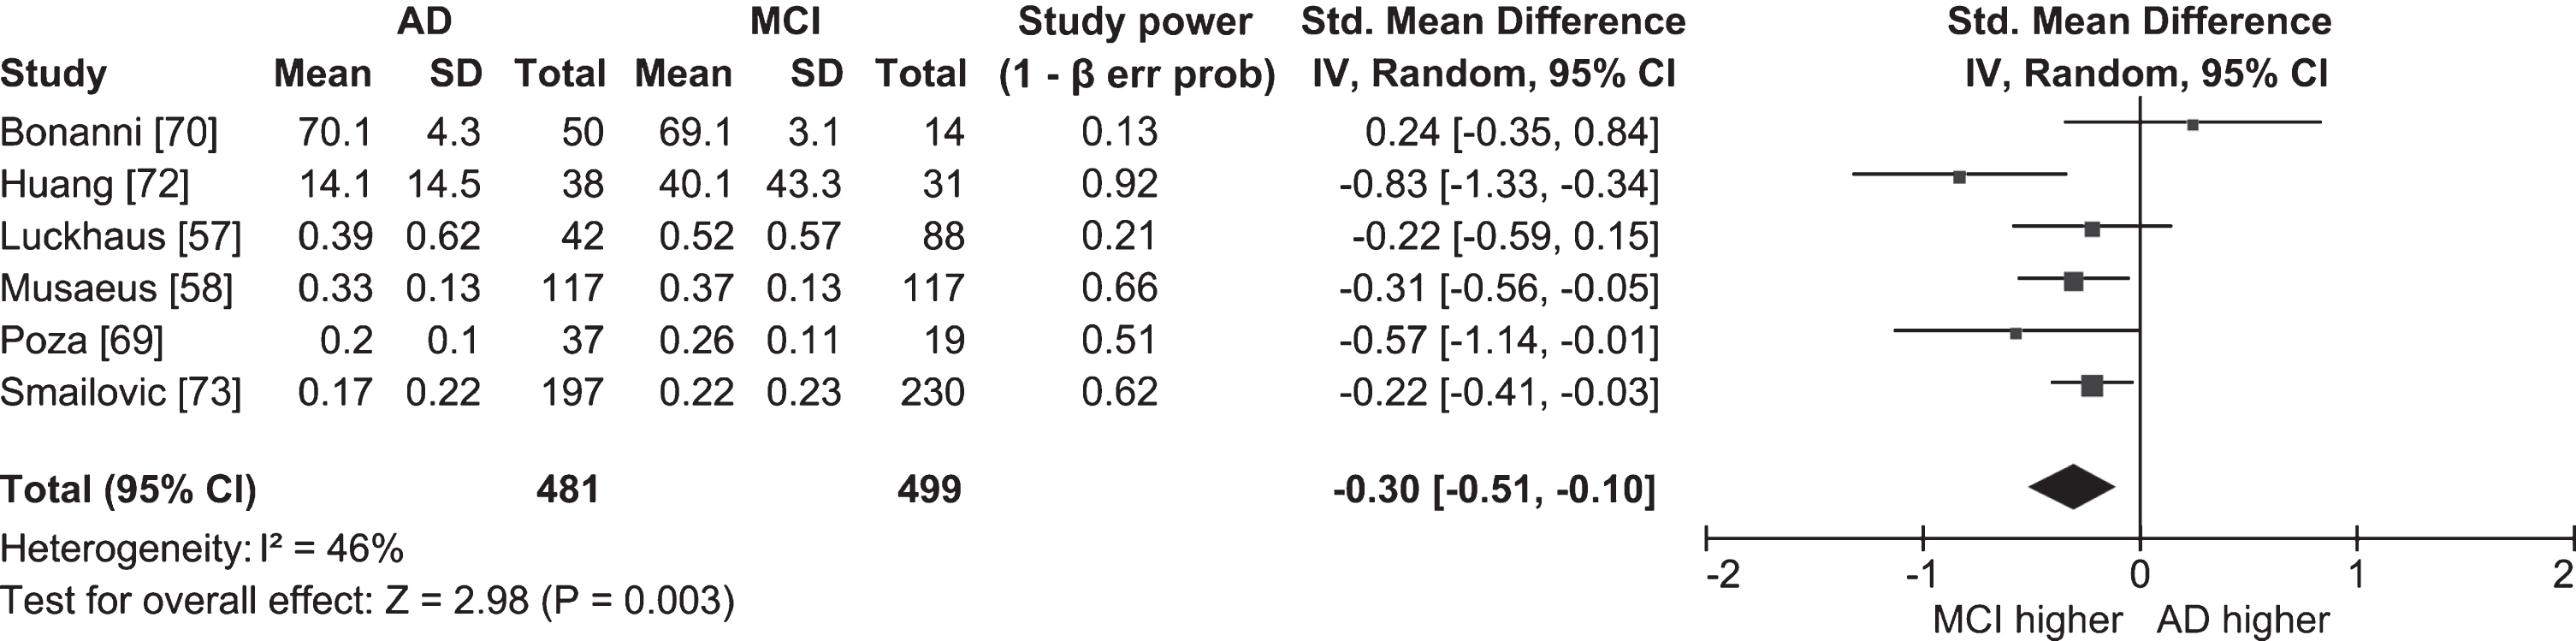 Table and forest plot of effect sizes for power in awake resting state in the full alpha band in people with AD versus people with MCI. Standardized mean difference was calculated by subtracting the mean alpha power of the MCI group from that of the AD group and dividing it by the standard deviation of alpha power among both groups. For the explanation of the table and the plot, see Fig. 2.